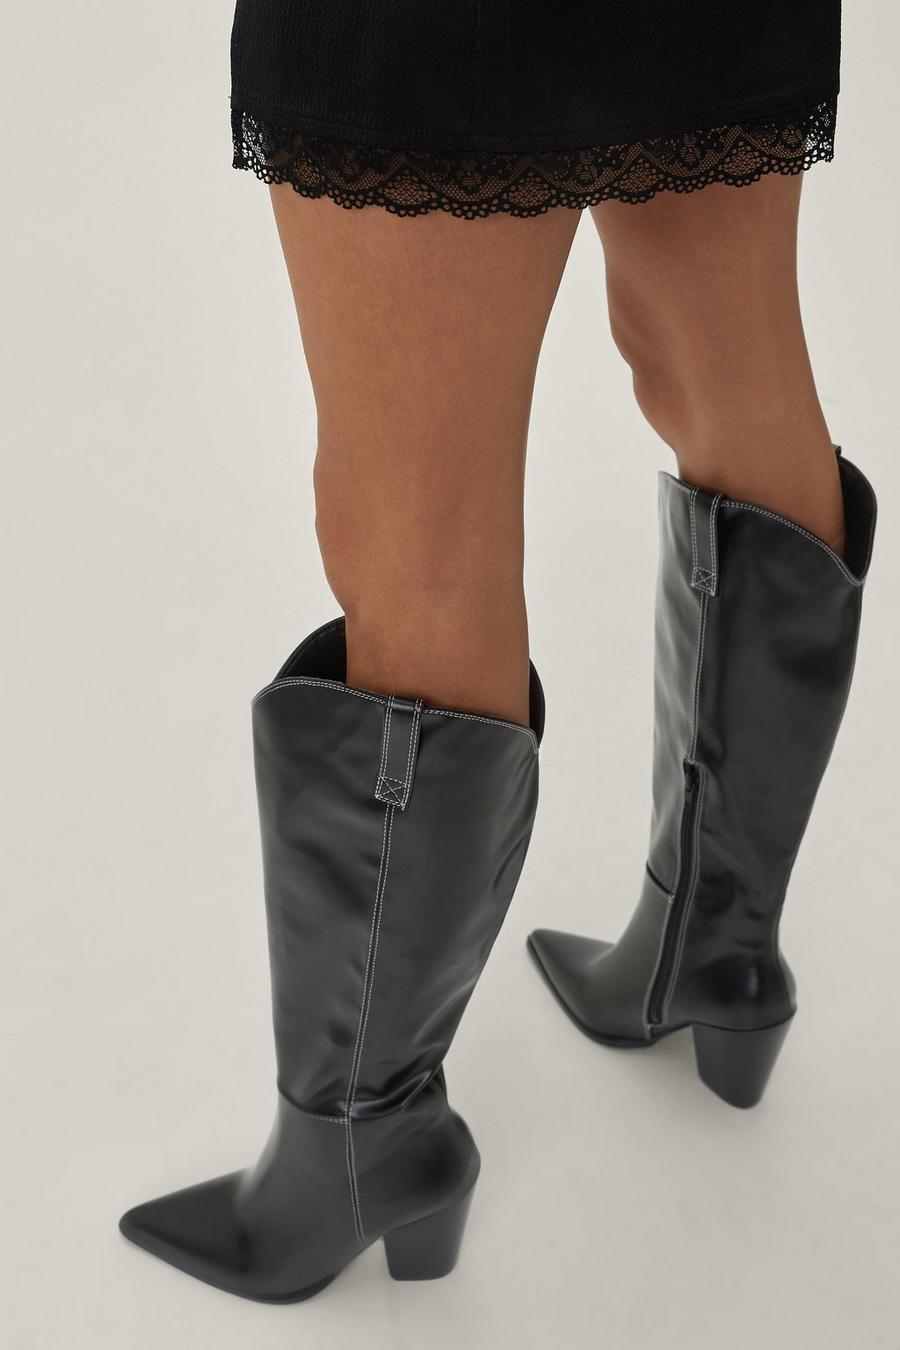 Contrast Stitch Knee High Western Boots